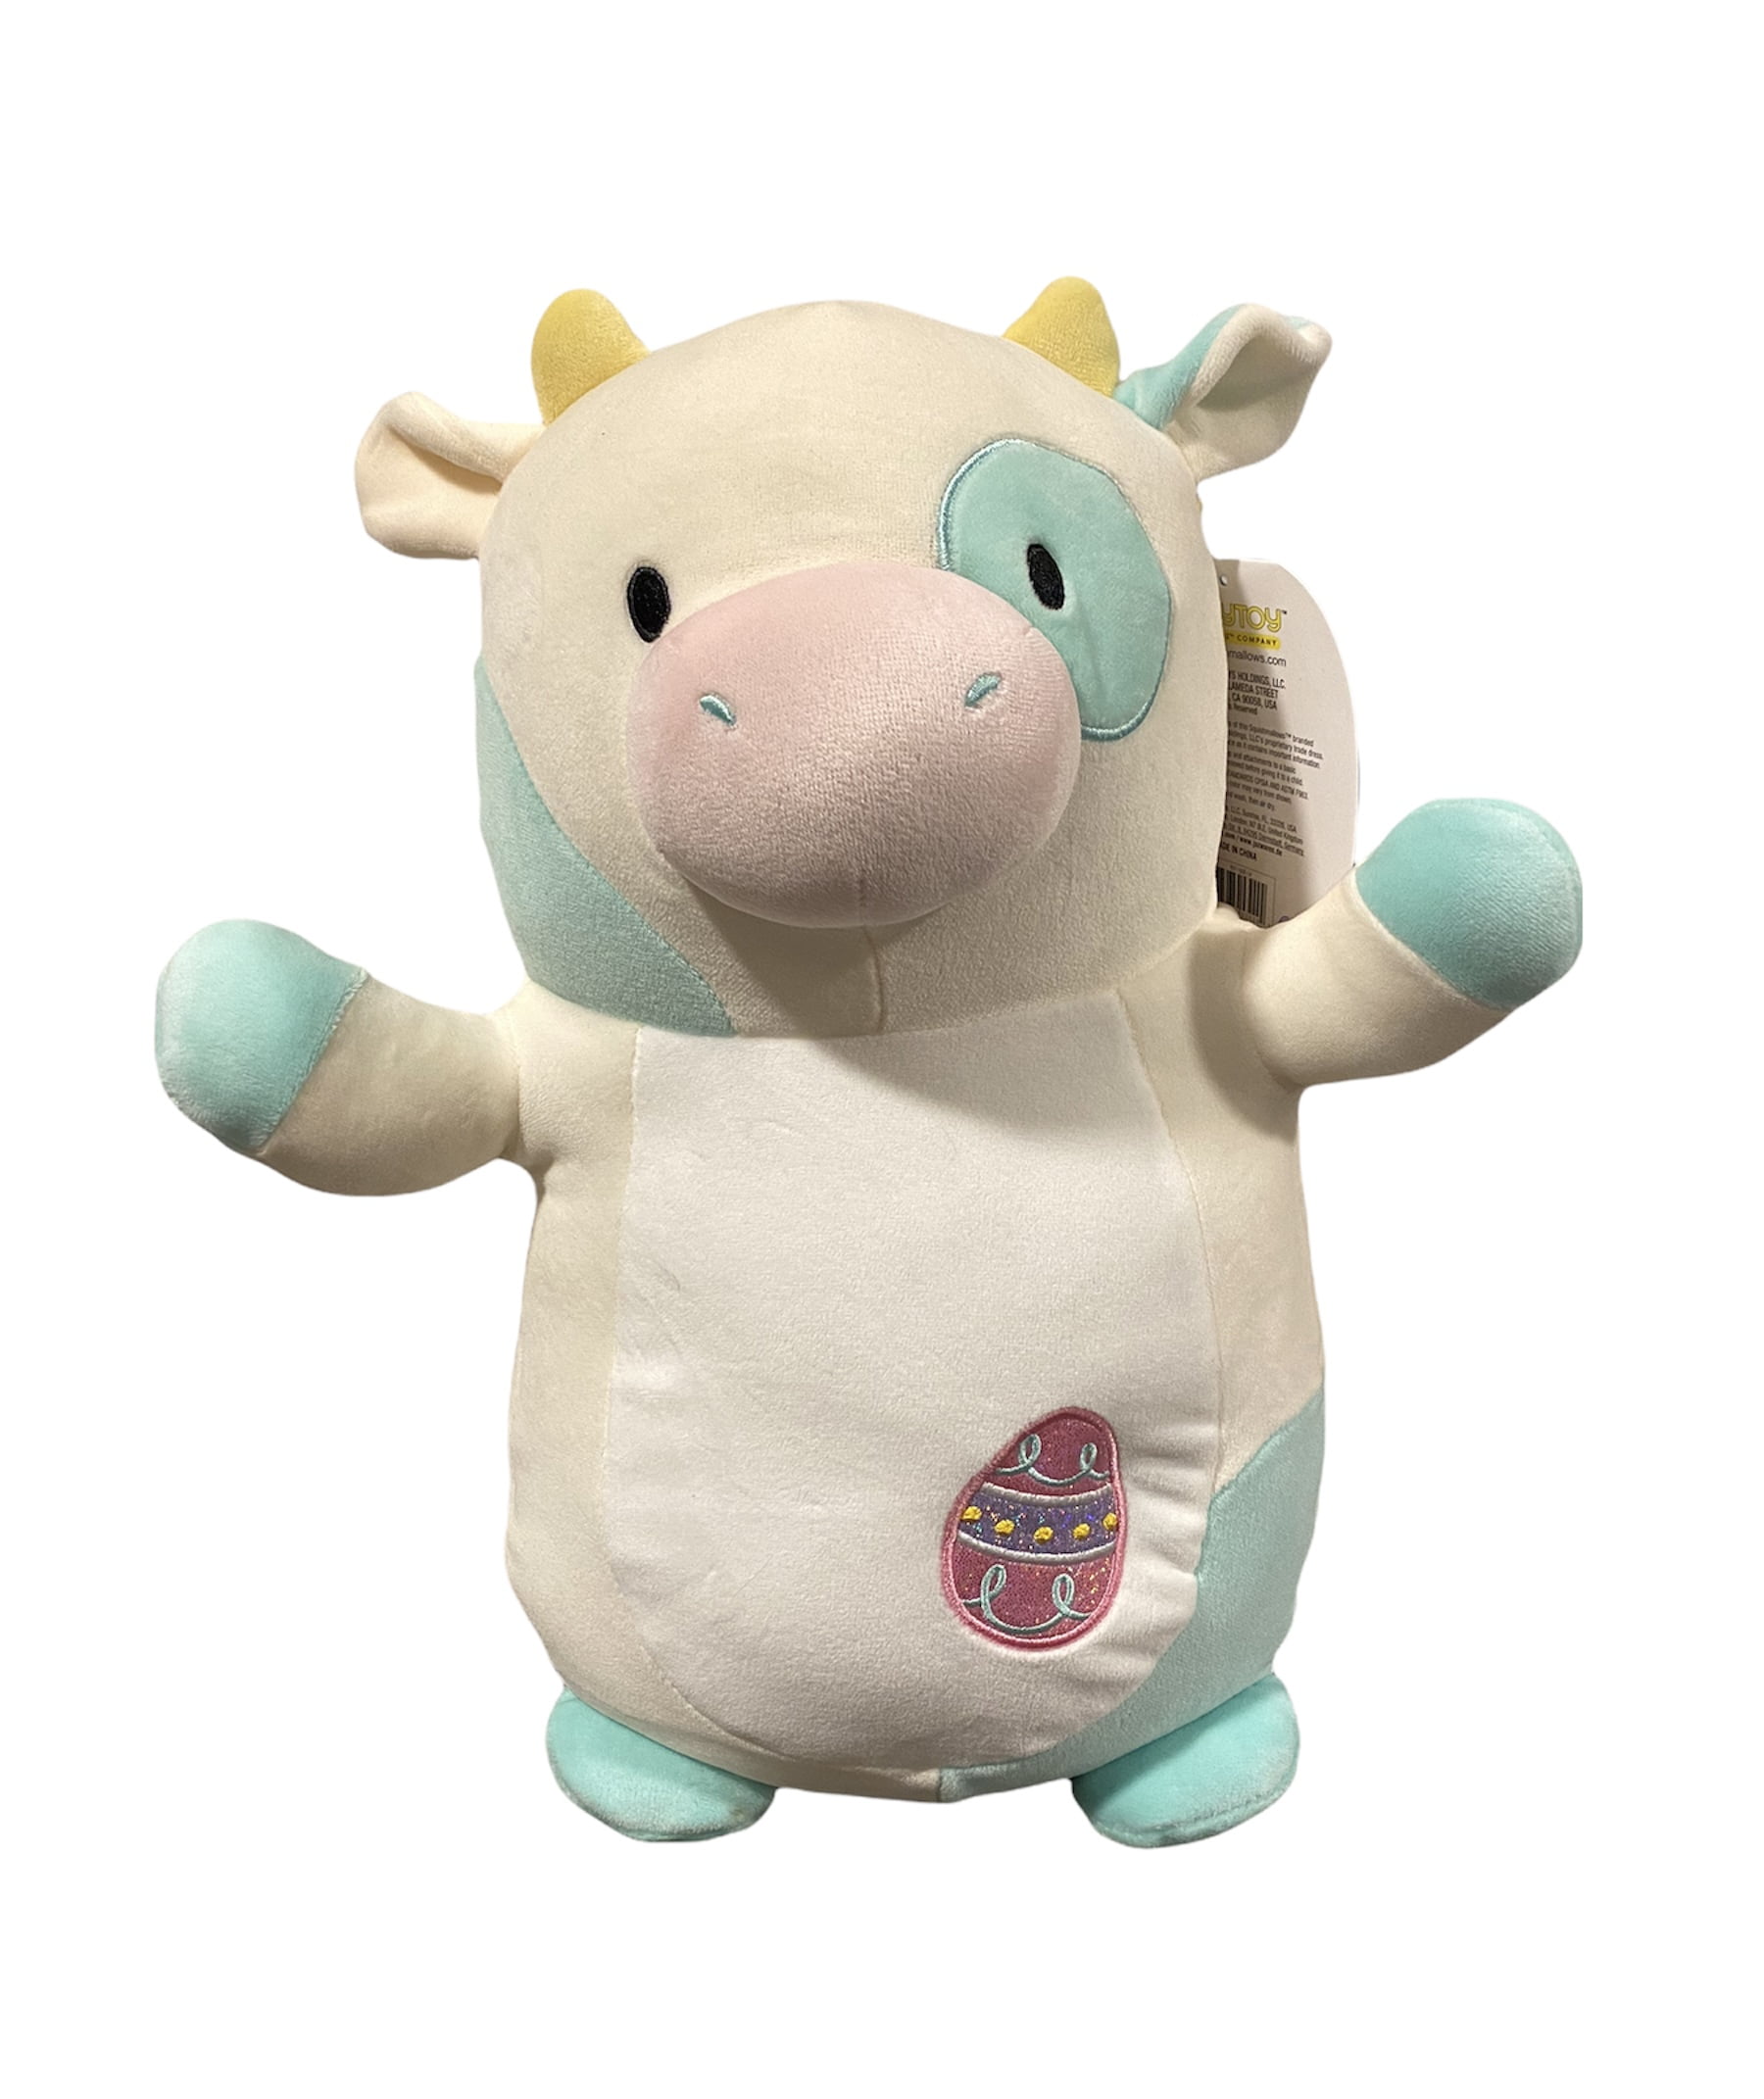 Squishmallow Belana 5" Cow Easter 2021 Collection Kellytoy Plush BRAND NEW RARE 